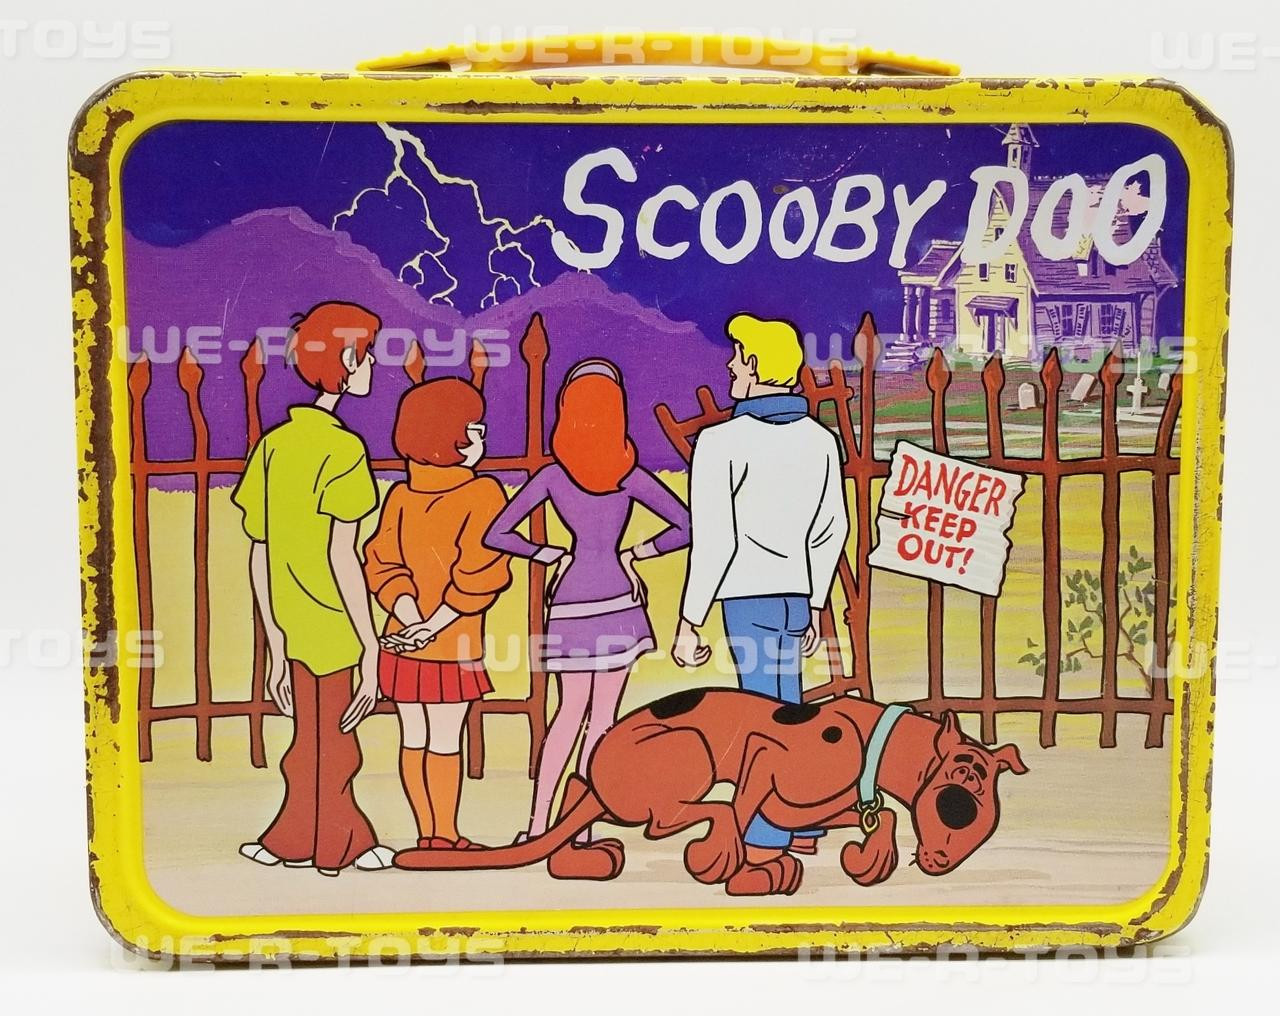 https://cdn11.bigcommerce.com/s-cy4lua1xoh/images/stencil/1280x1280/products/13431/85323/scooby-doo-tin-metal-lunchbox-and-thermos-1973-hanna-barbera-productions-used__07729.1659133228.jpg?c=1?imbypass=on